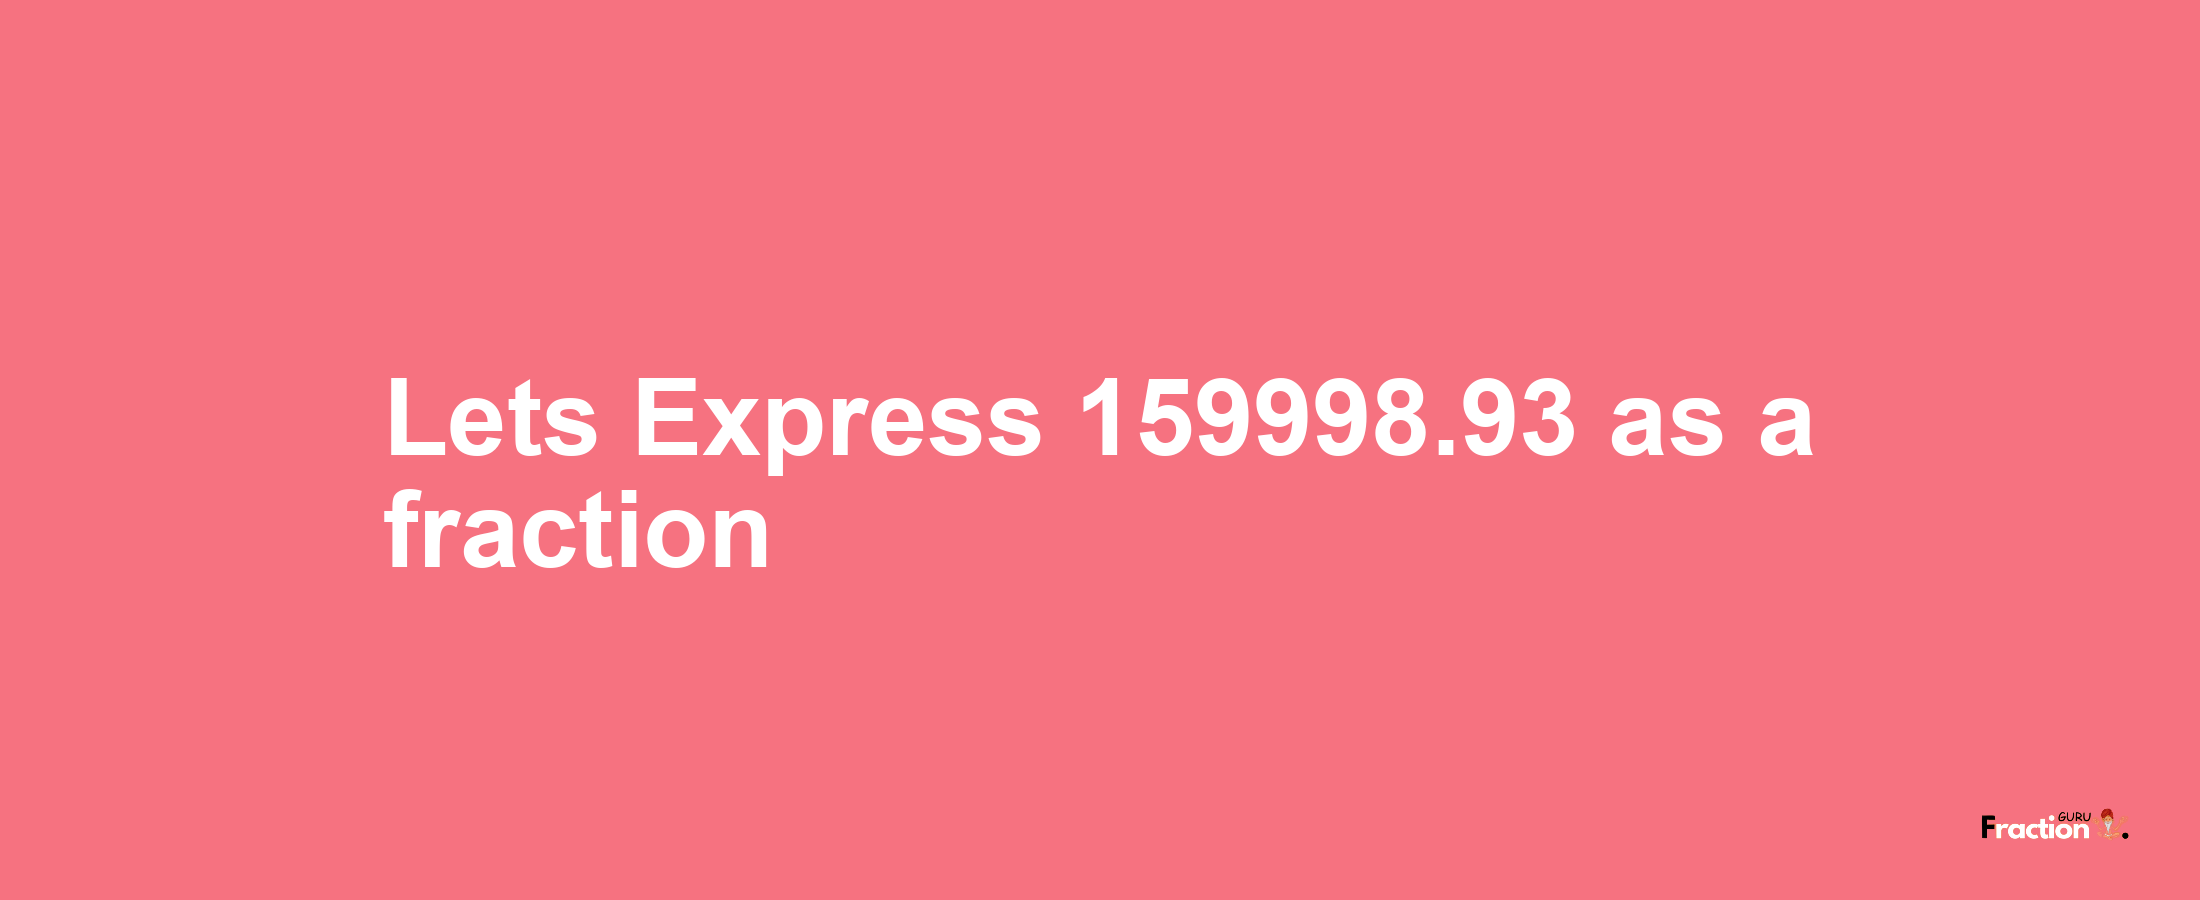 Lets Express 159998.93 as afraction